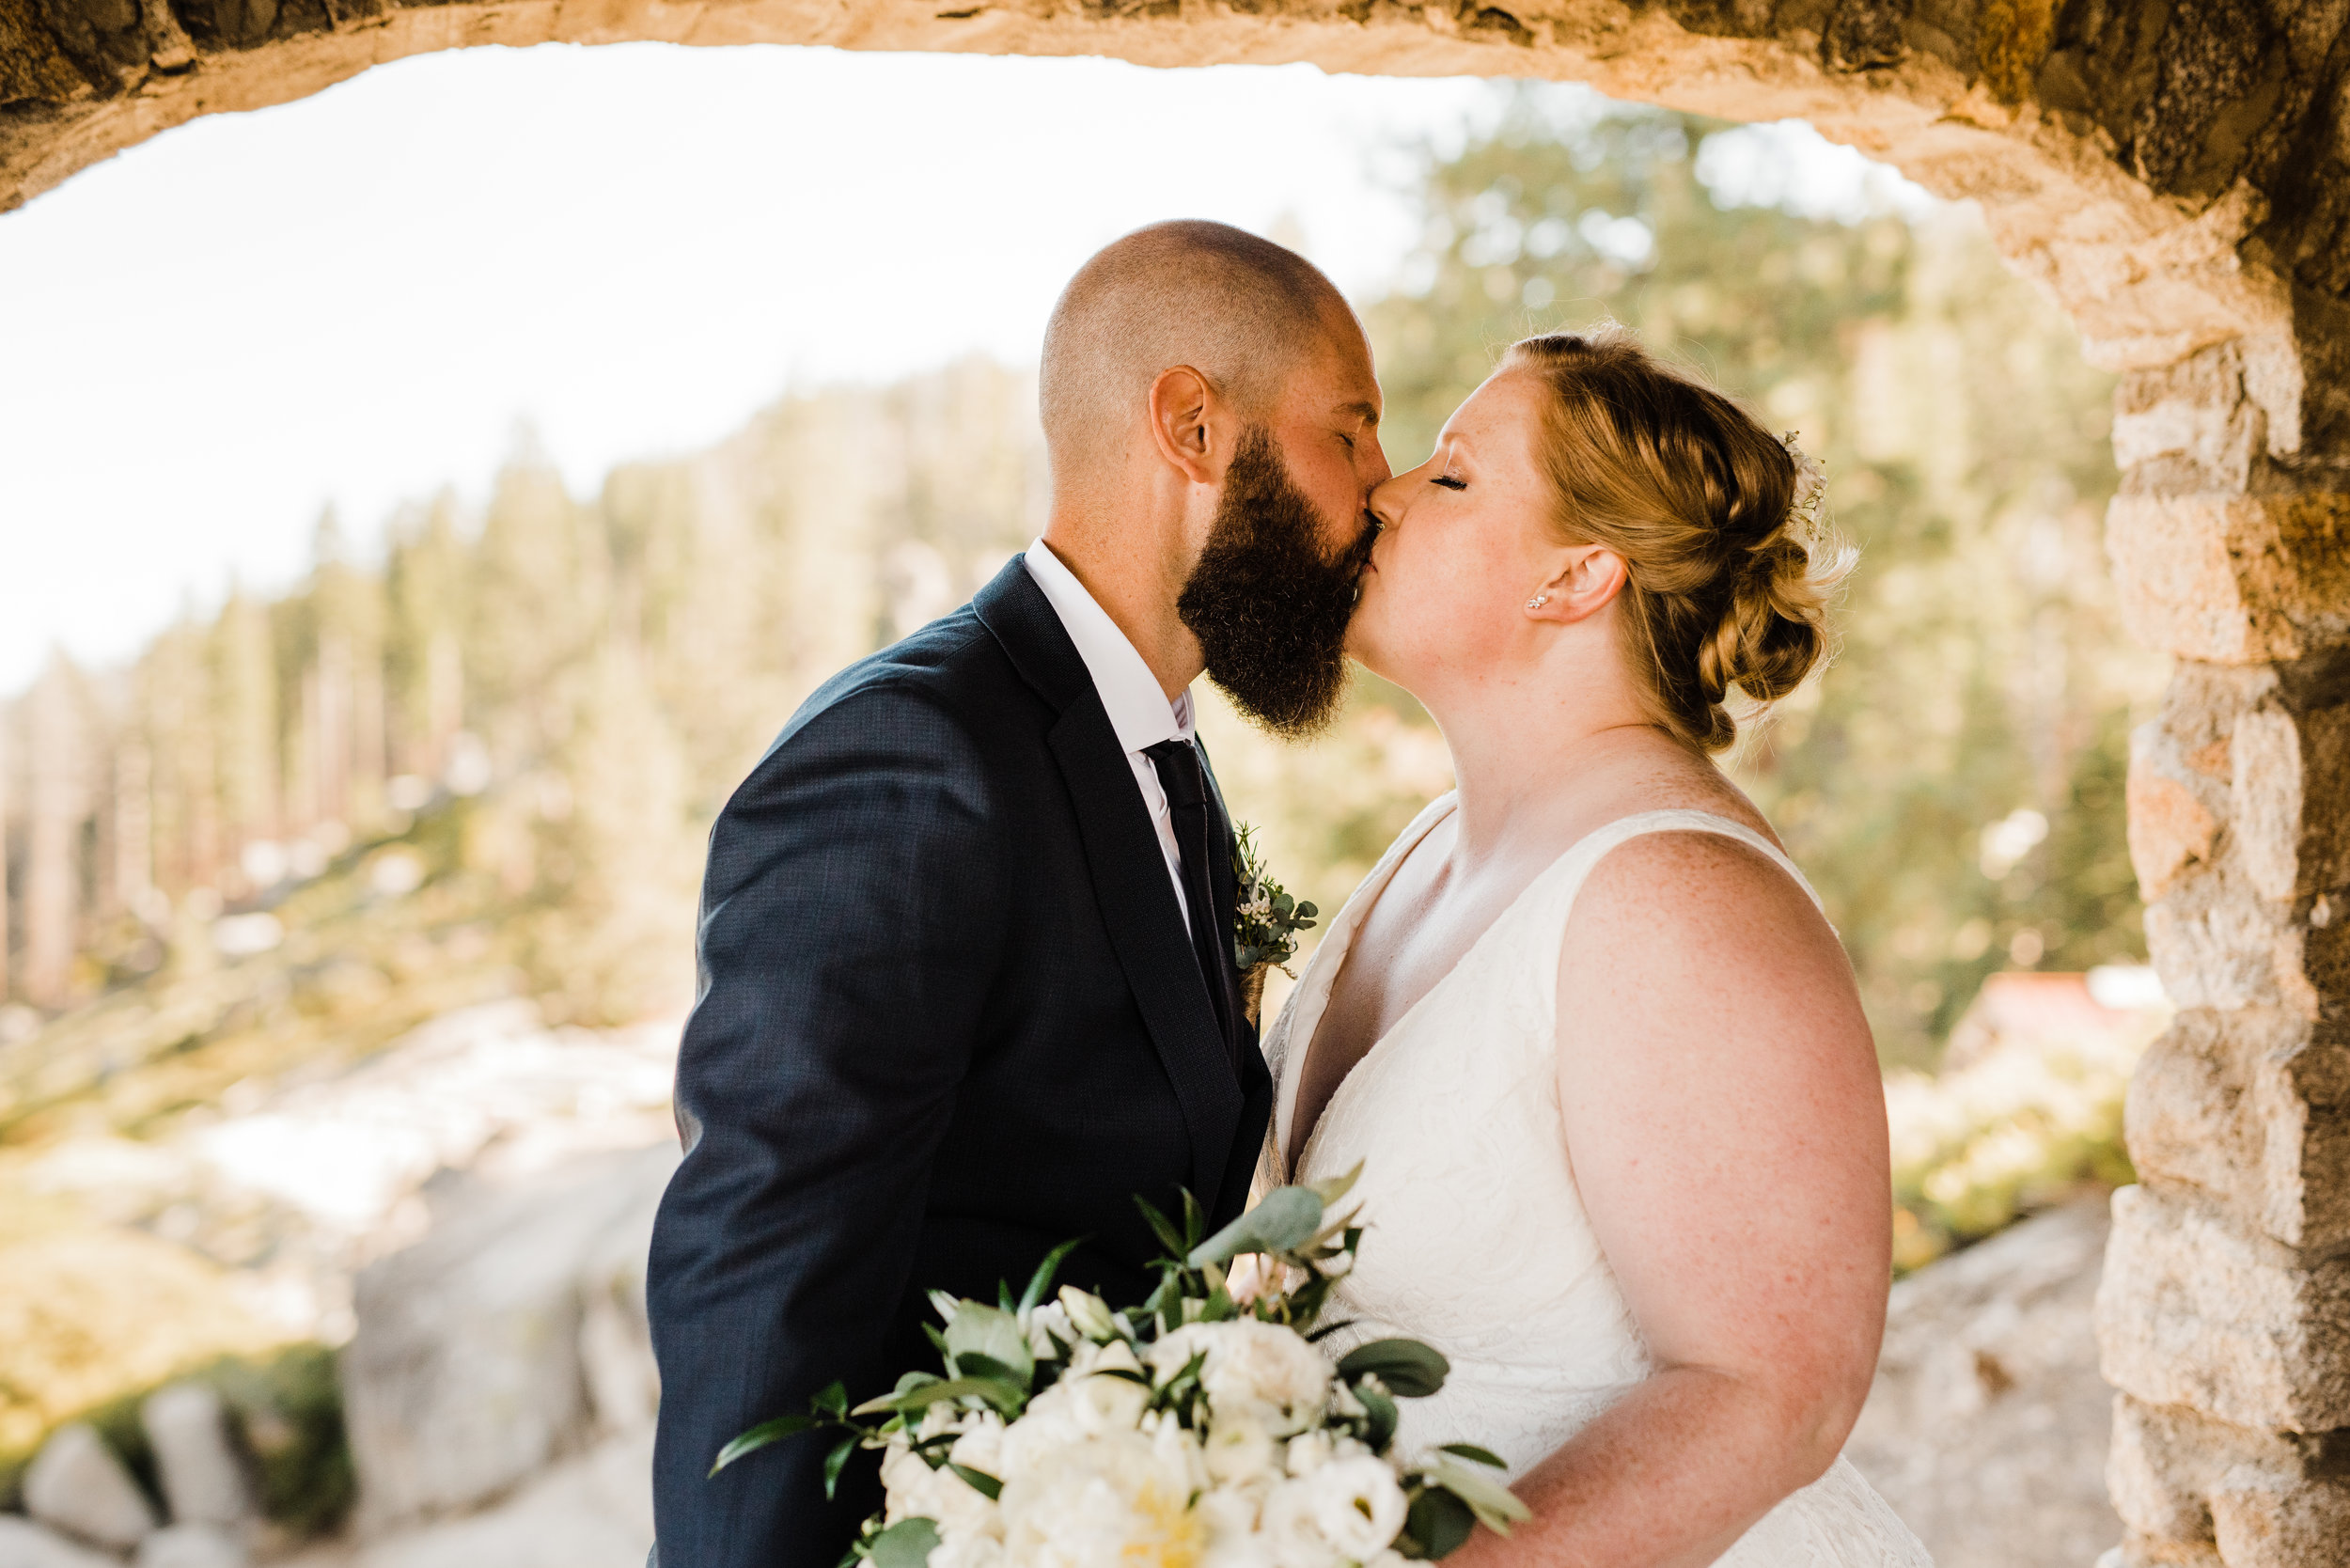 Wedding Portraits in Yosemite's Geology Hut Built in the 1920's